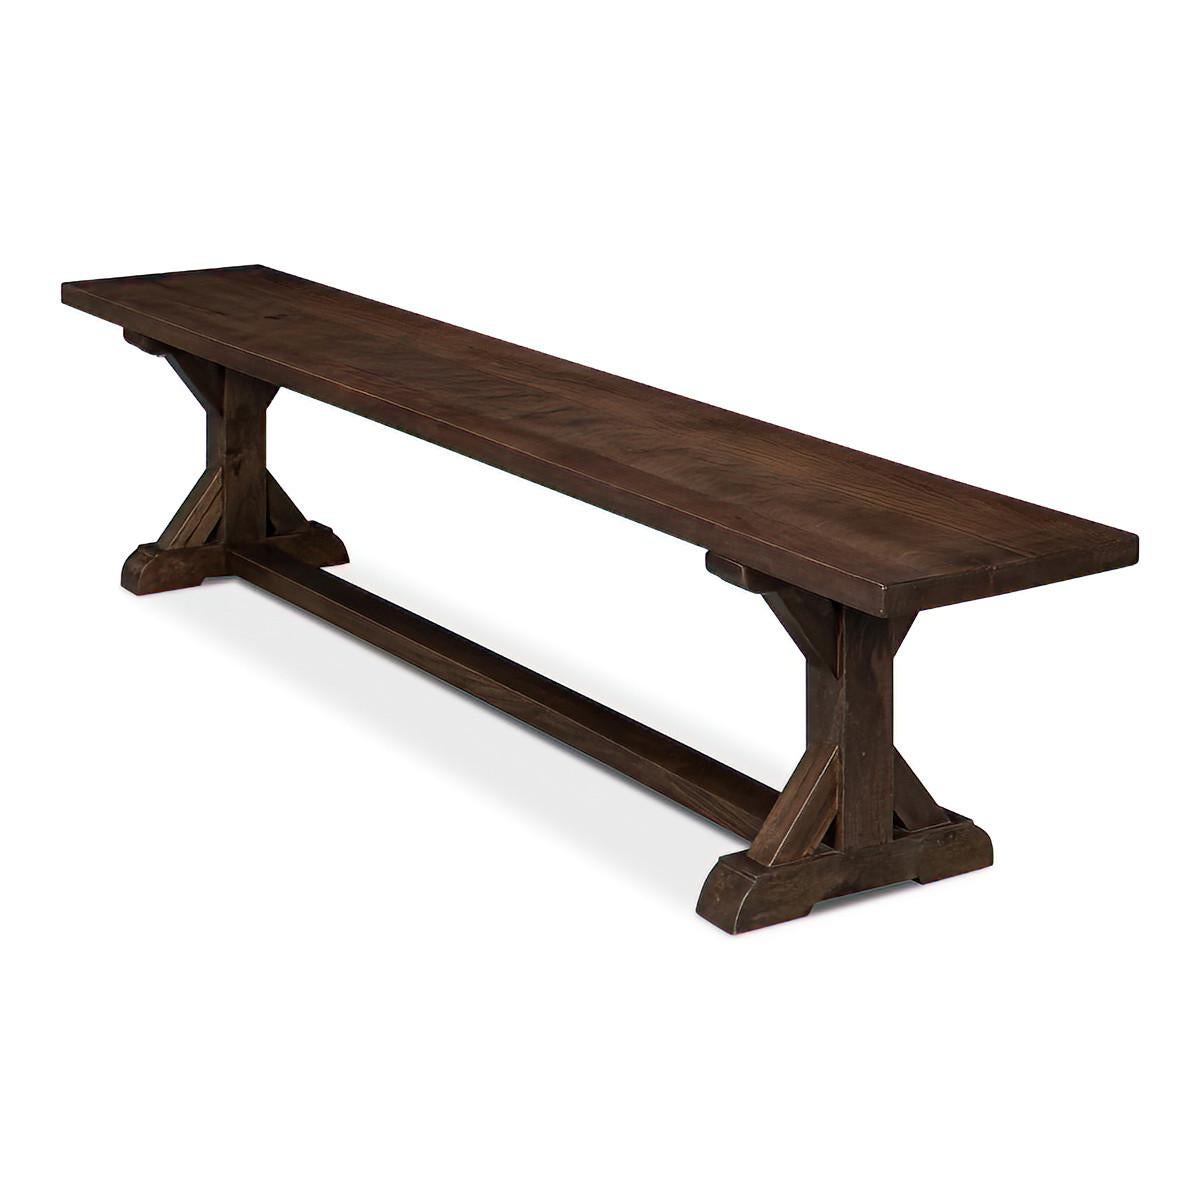 Asian Rustic Farmhouse Bench For Sale